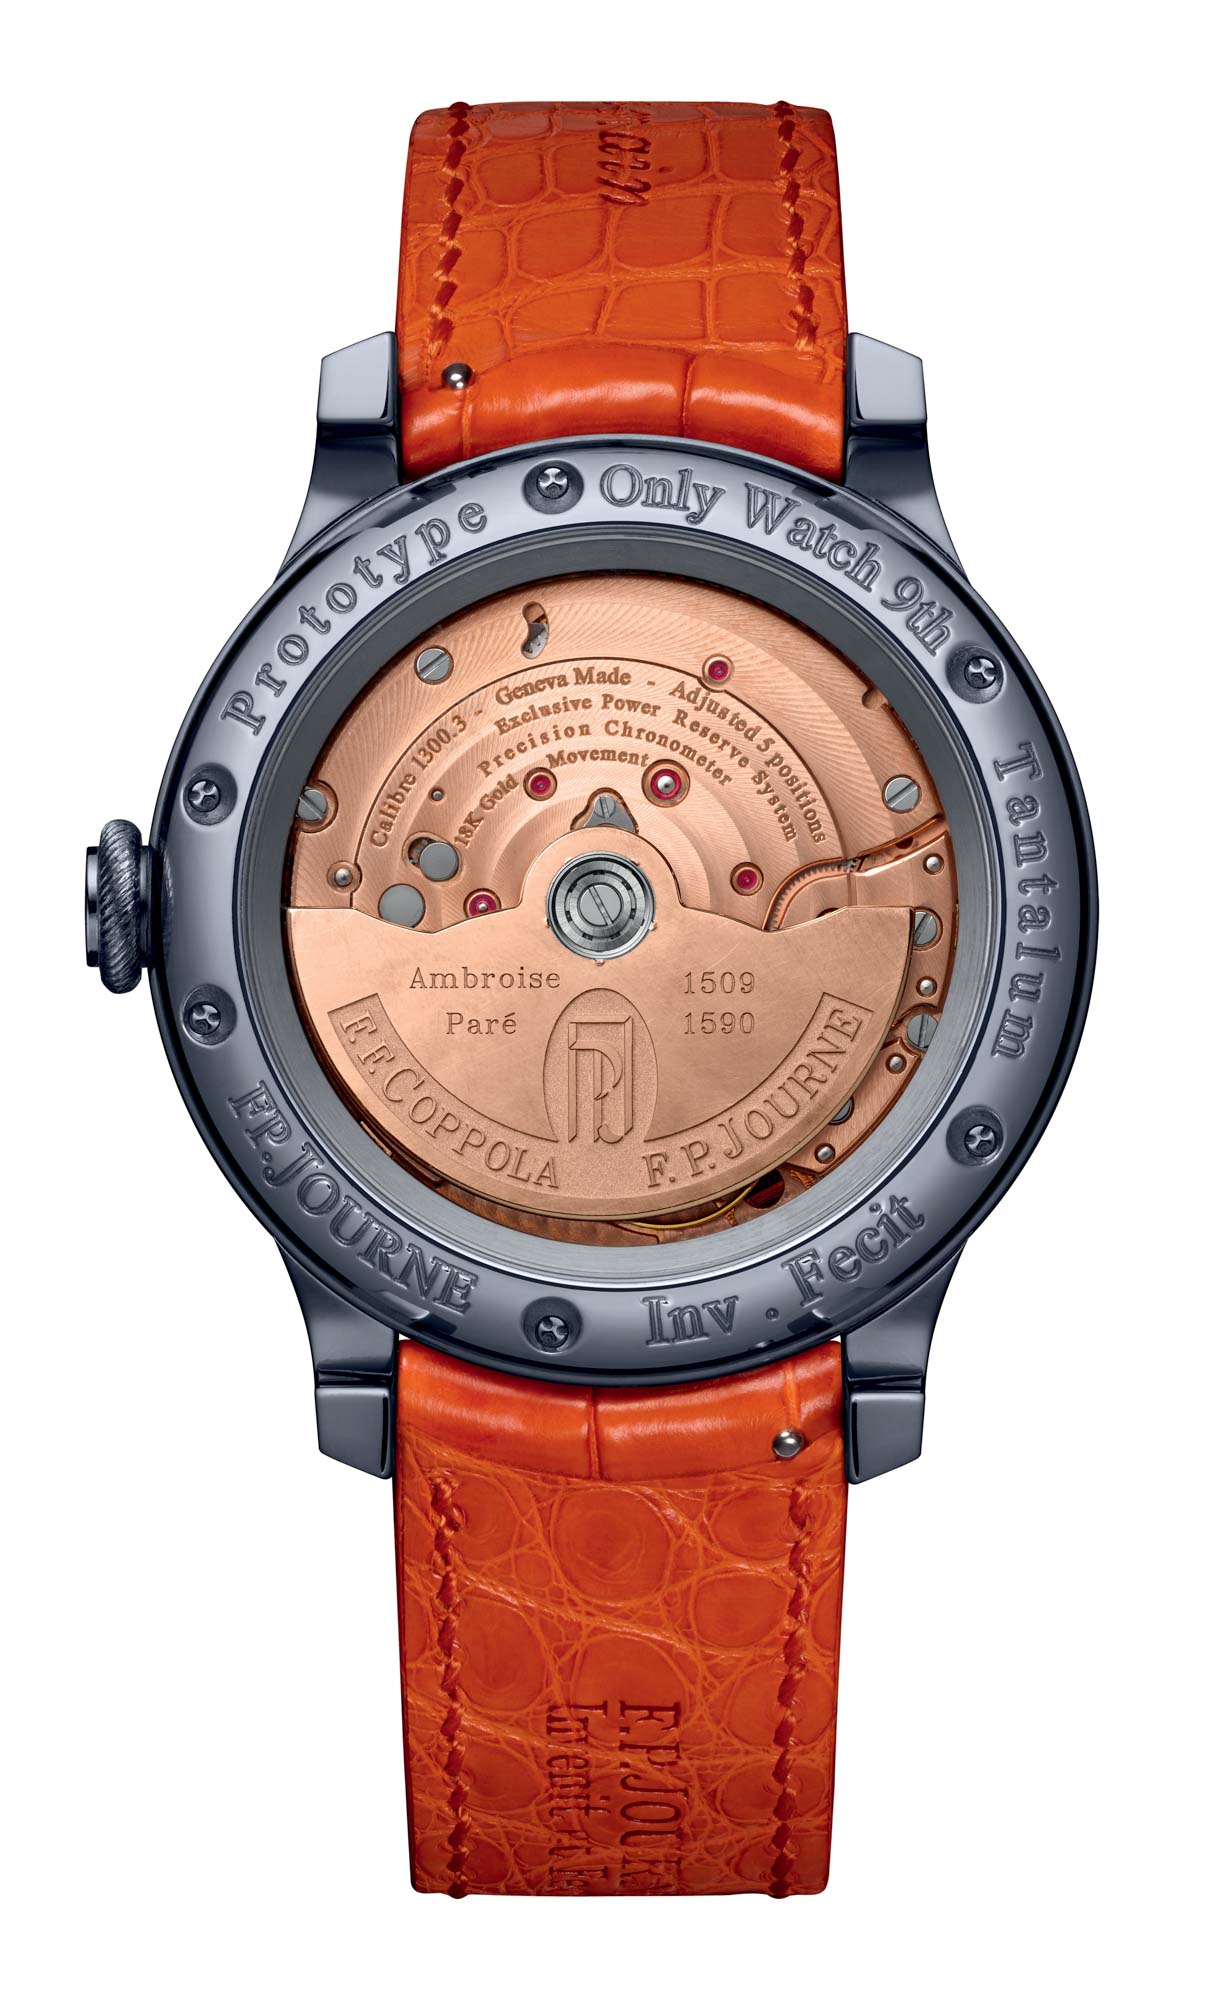 FP Journe OnlyWatch21 1